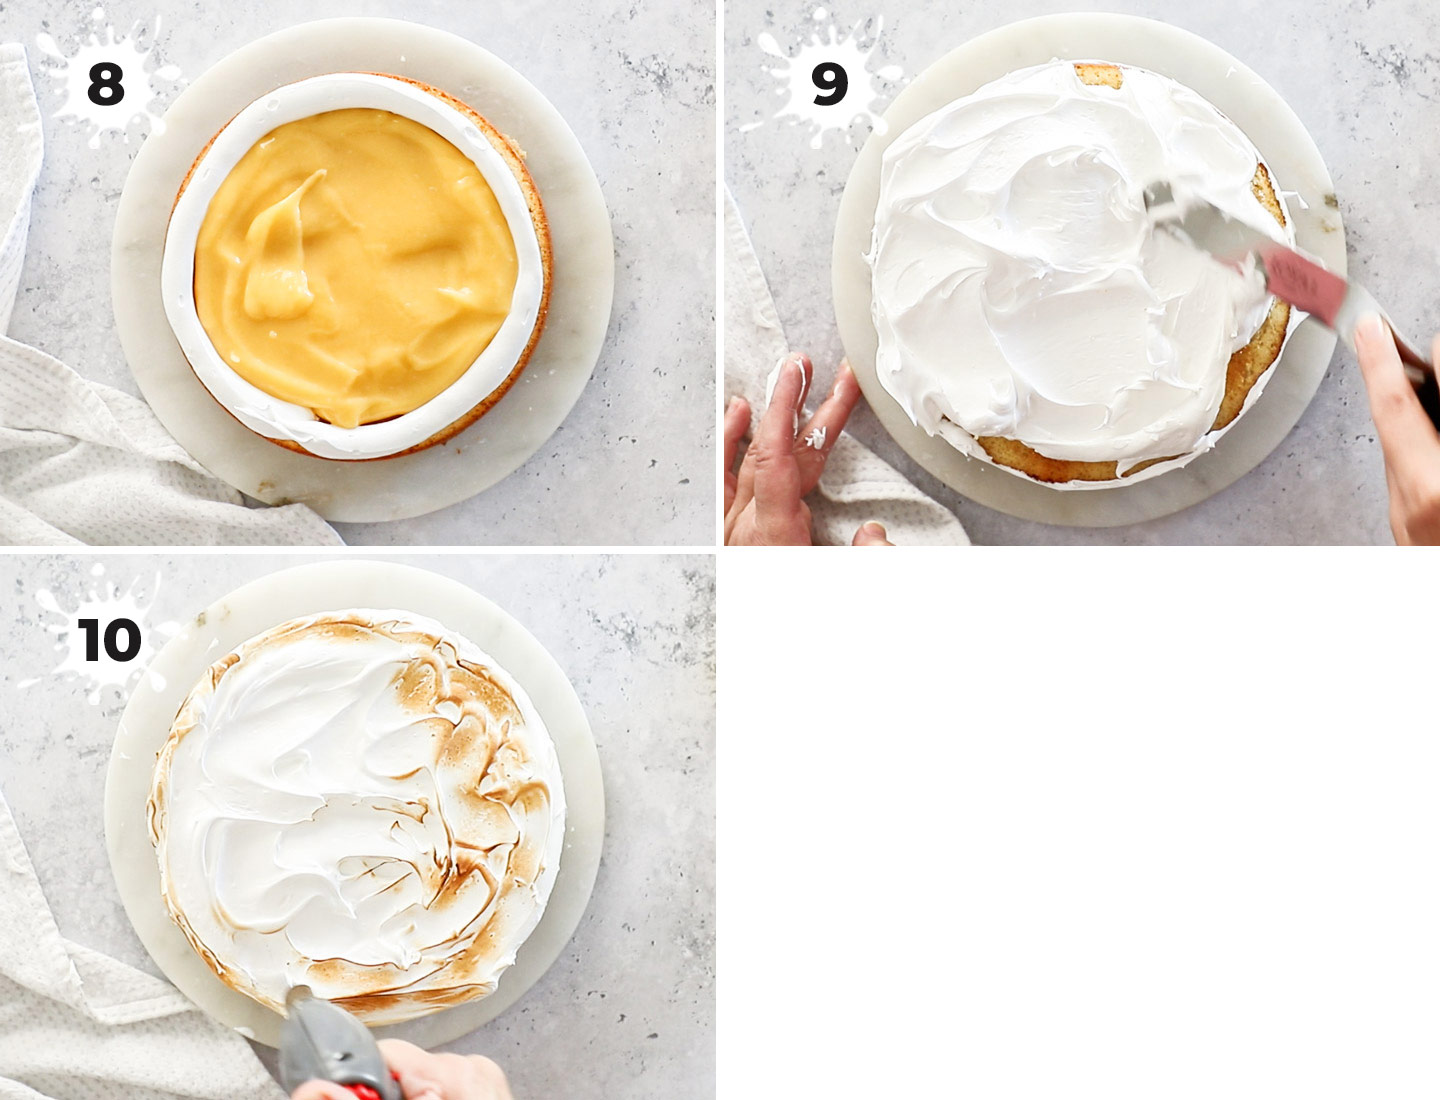 A collage showing how to assemble lemon meringue cake.